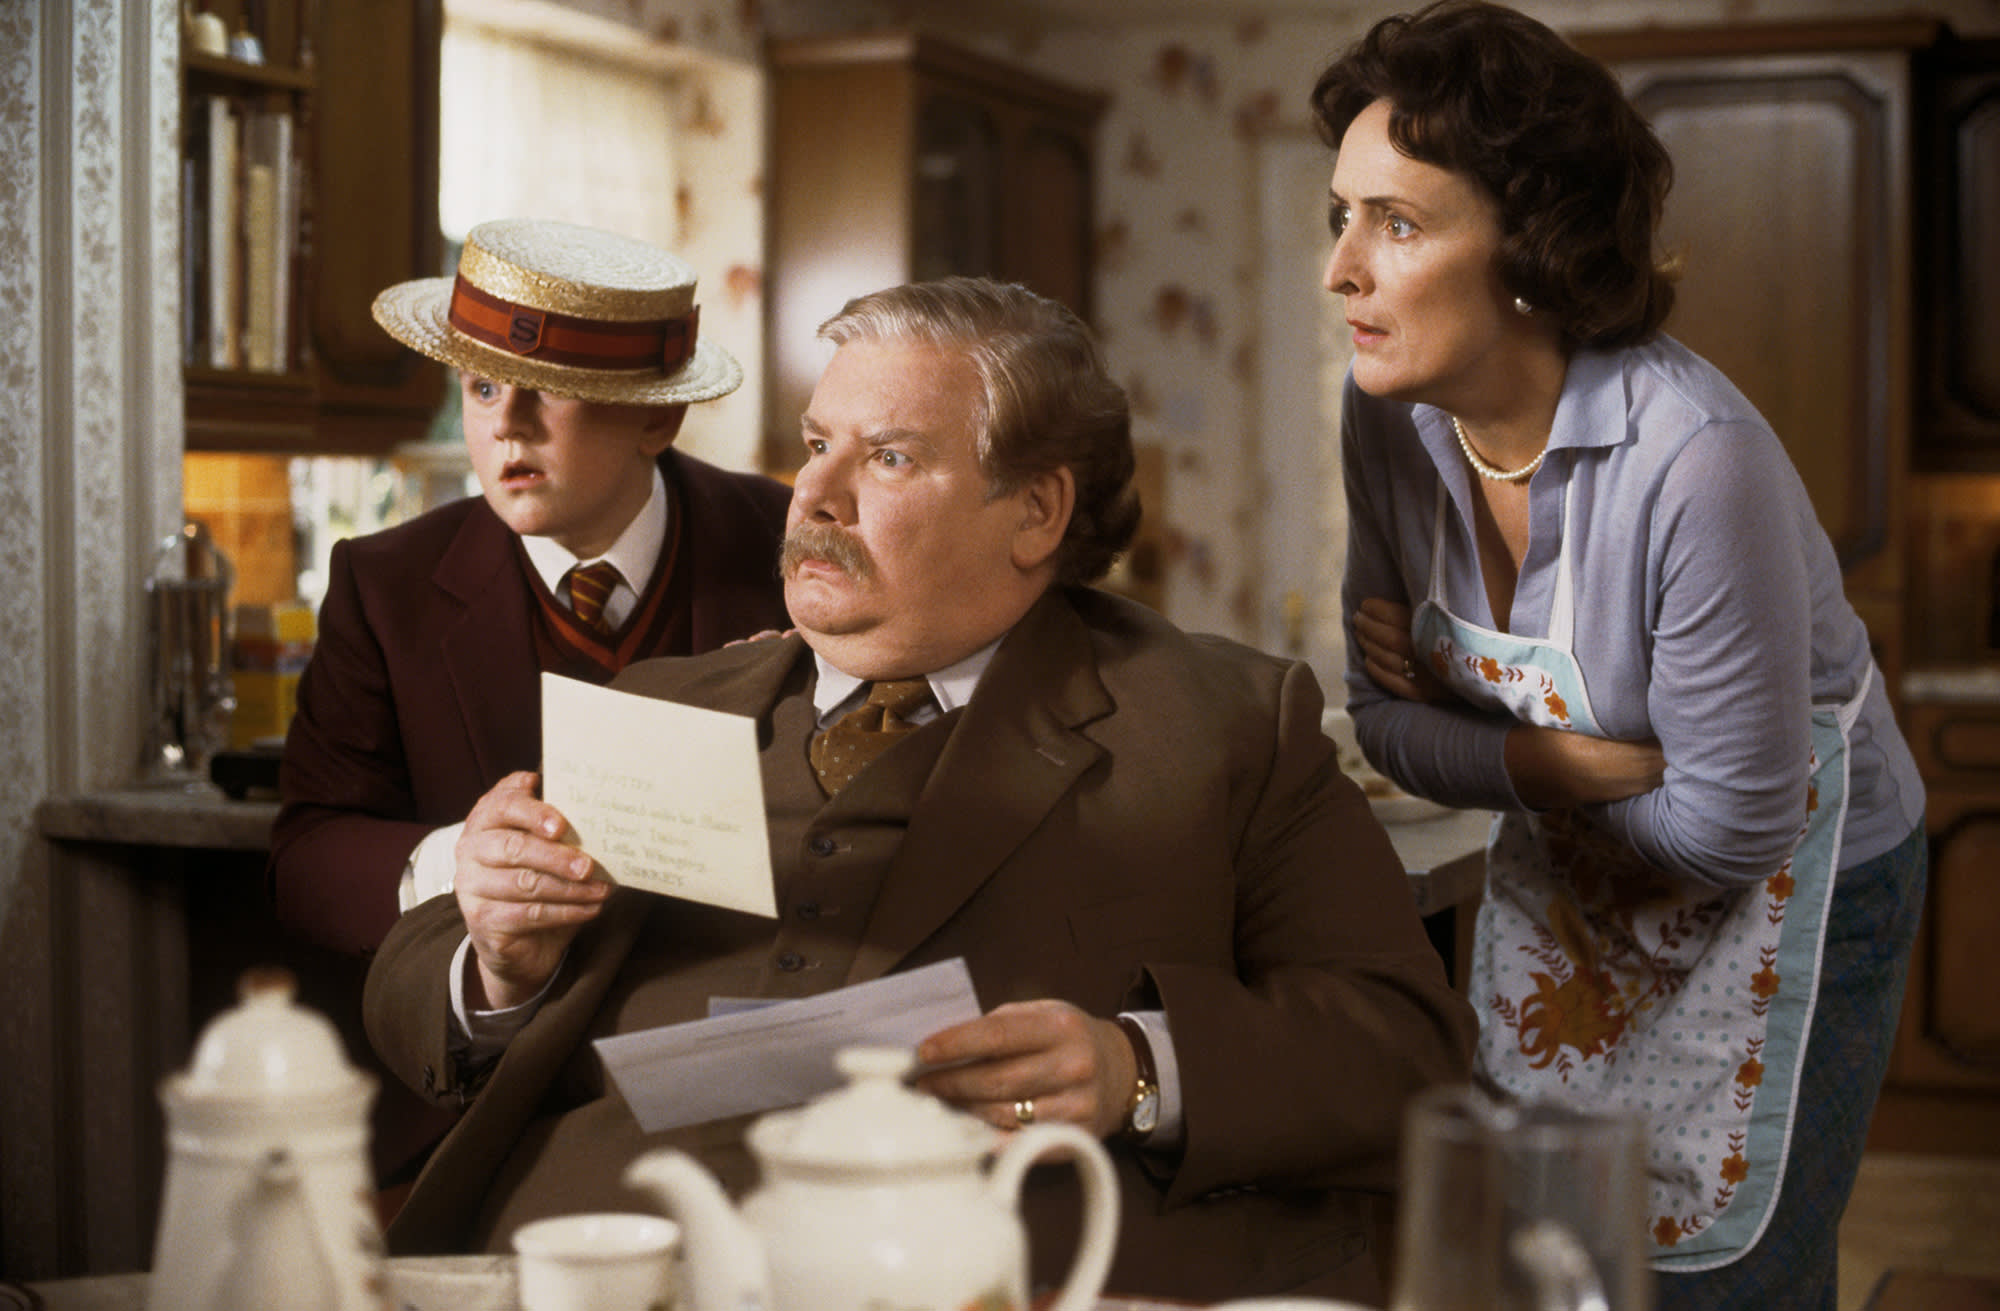 Vernon Dursley sat at the kitchen table holding Harry's Hogwarts letter. Petunia and Dudley are both looking over his shoulder. All three look surprised and concerned.